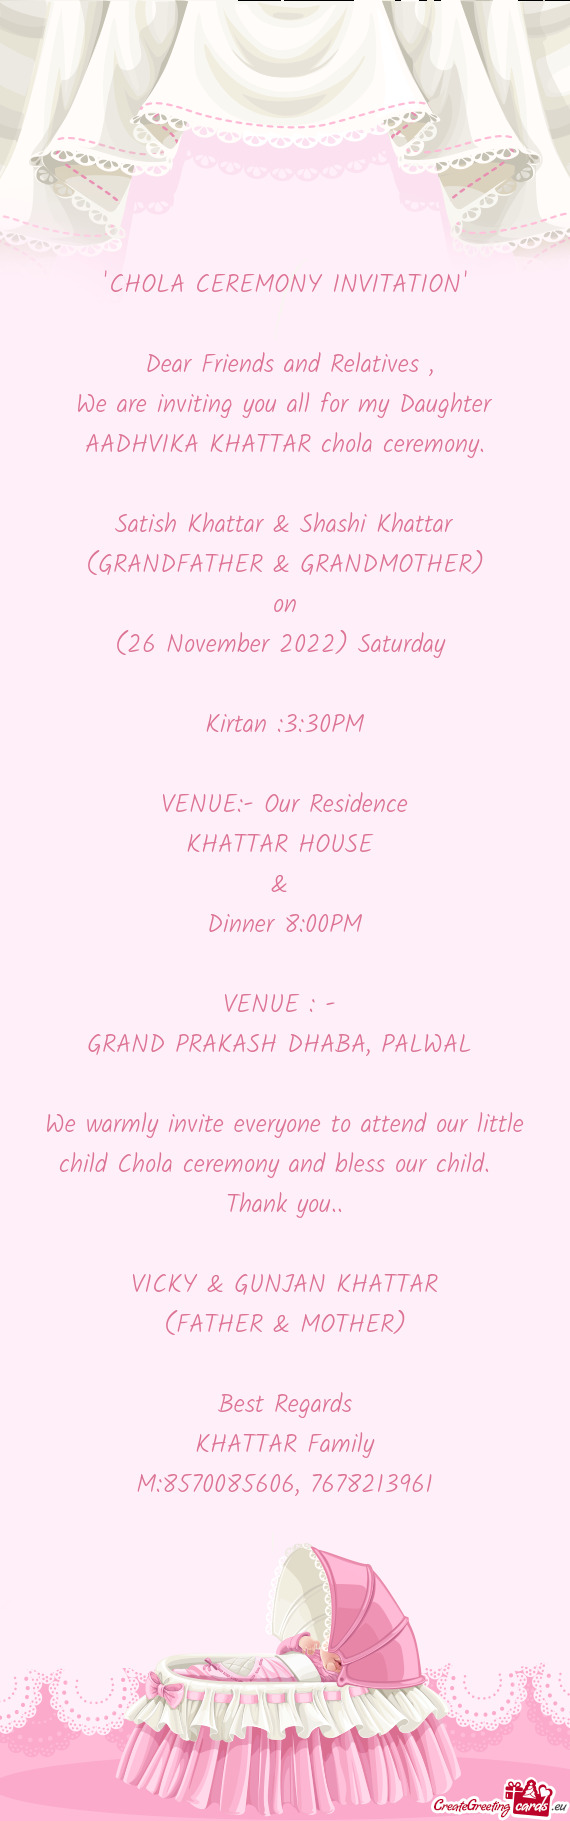 We are inviting you all for my Daughter AADHVIKA KHATTAR chola ceremony